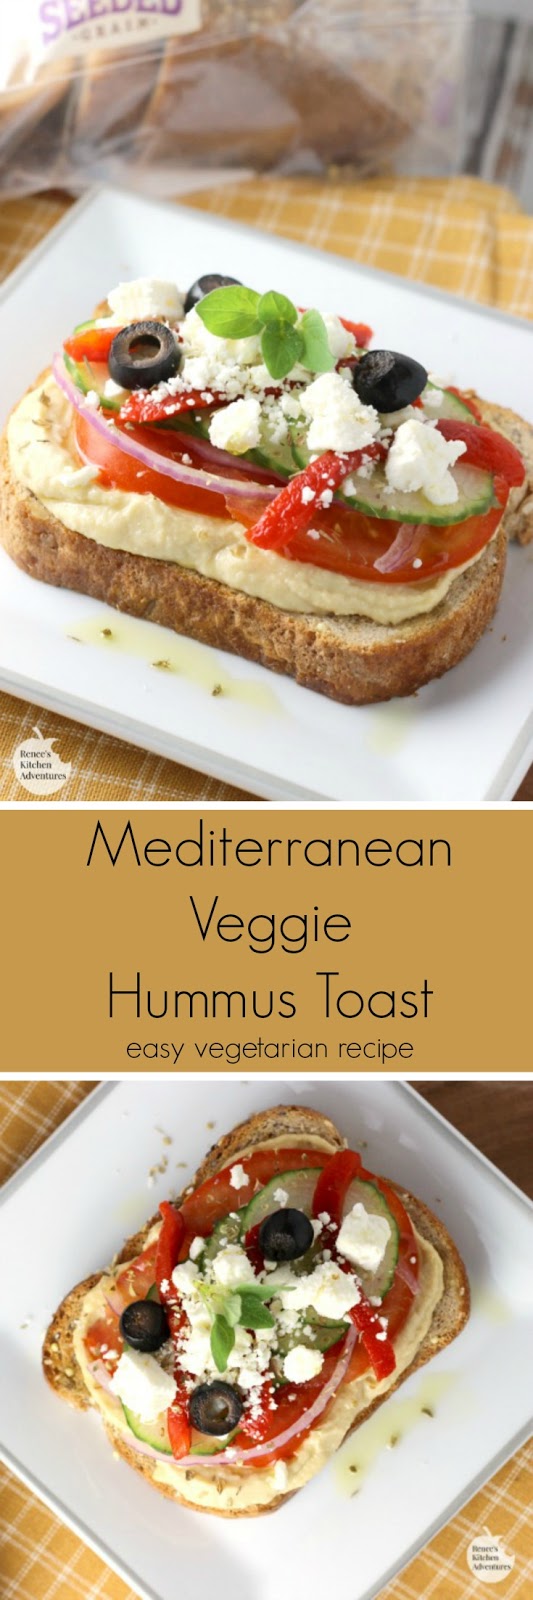 Mediterranean Veggie Hummus Toast | by Renee's Kitchen Adventures - easy healthy recipe for veggie toast with hummus. Perfect for snack, breakfast, or light lunch! #HarvestBlends 